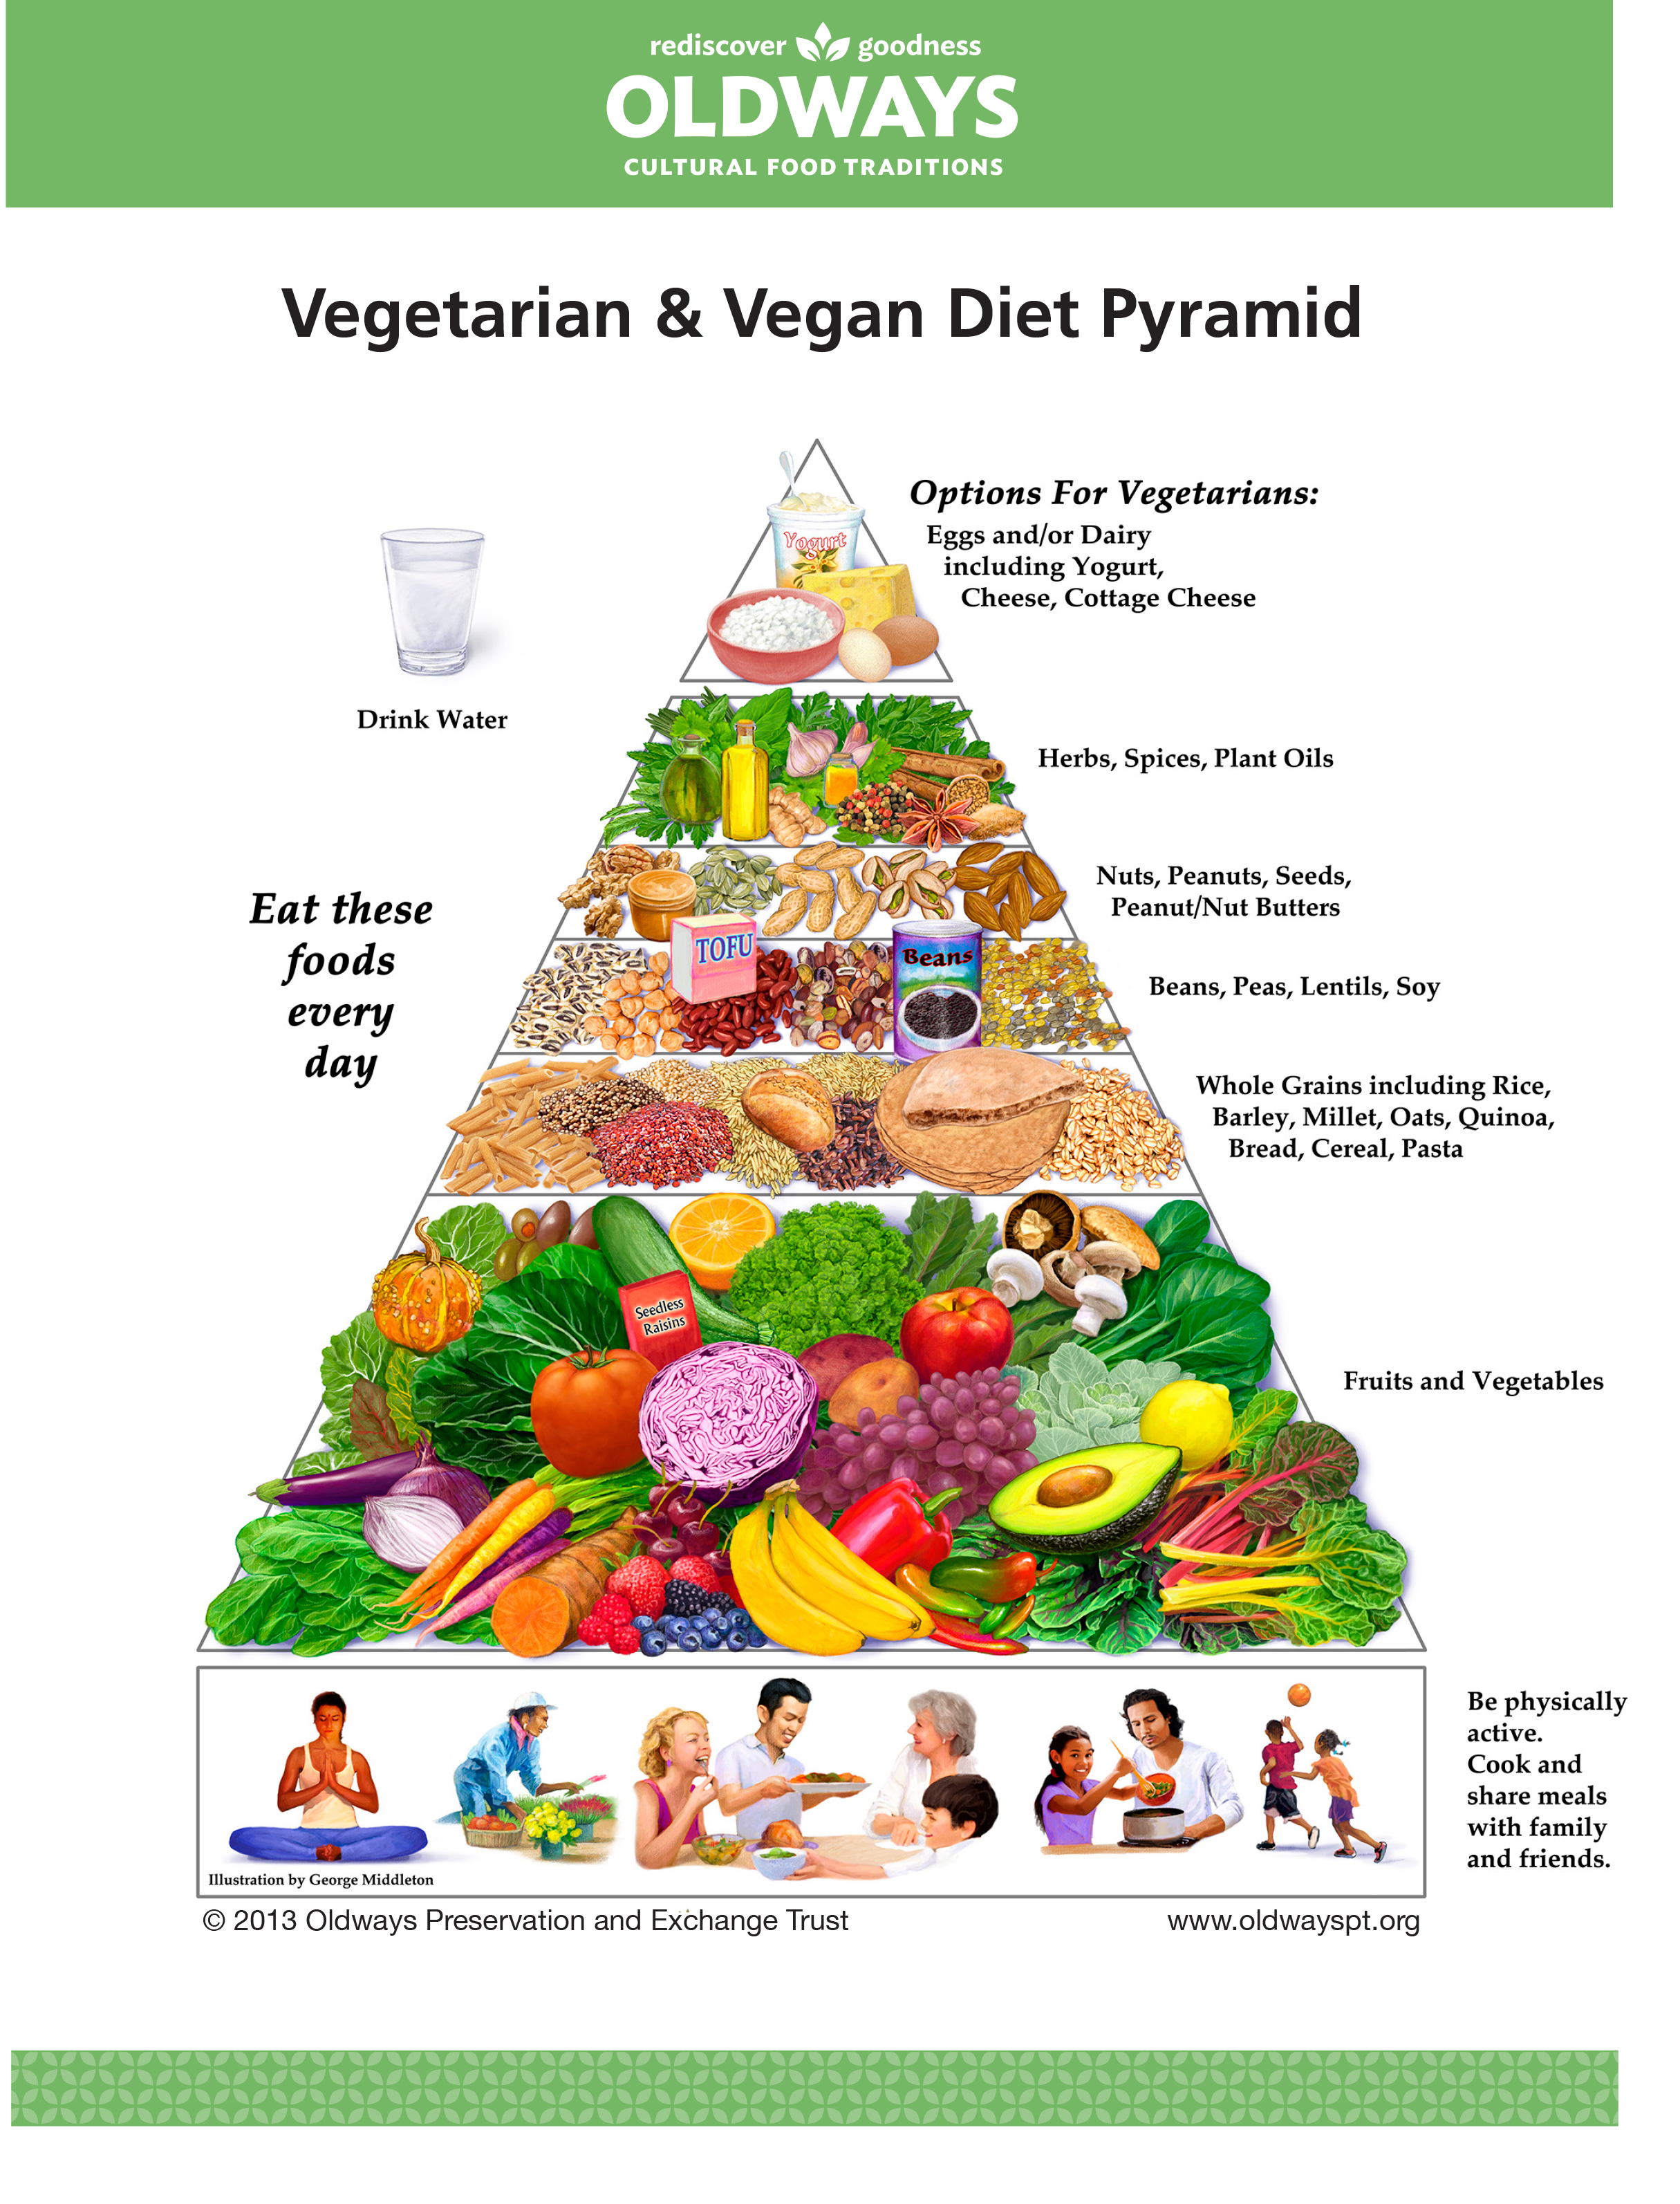 whats the difference between vegatarians and vegans diet